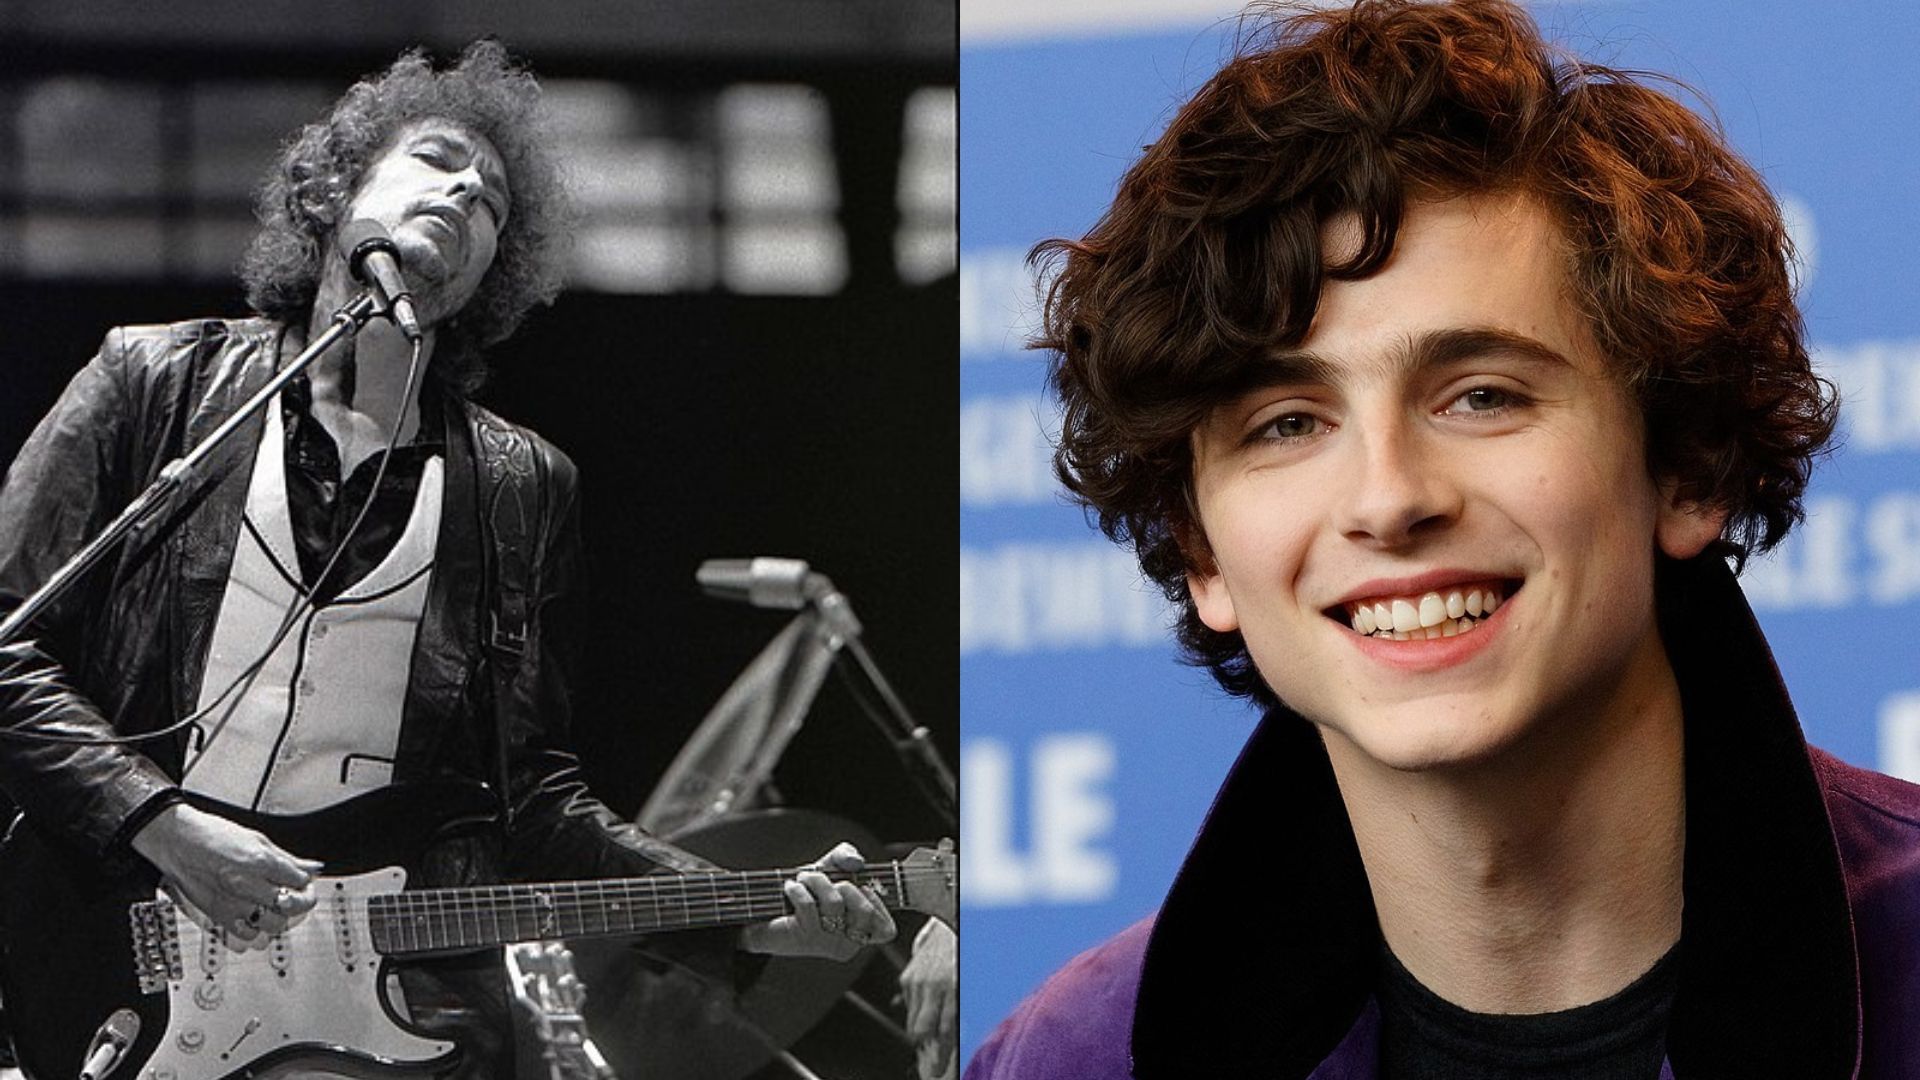 Bob Dylan Biopic Timothée Chalamet To Portray The Iconic Singer